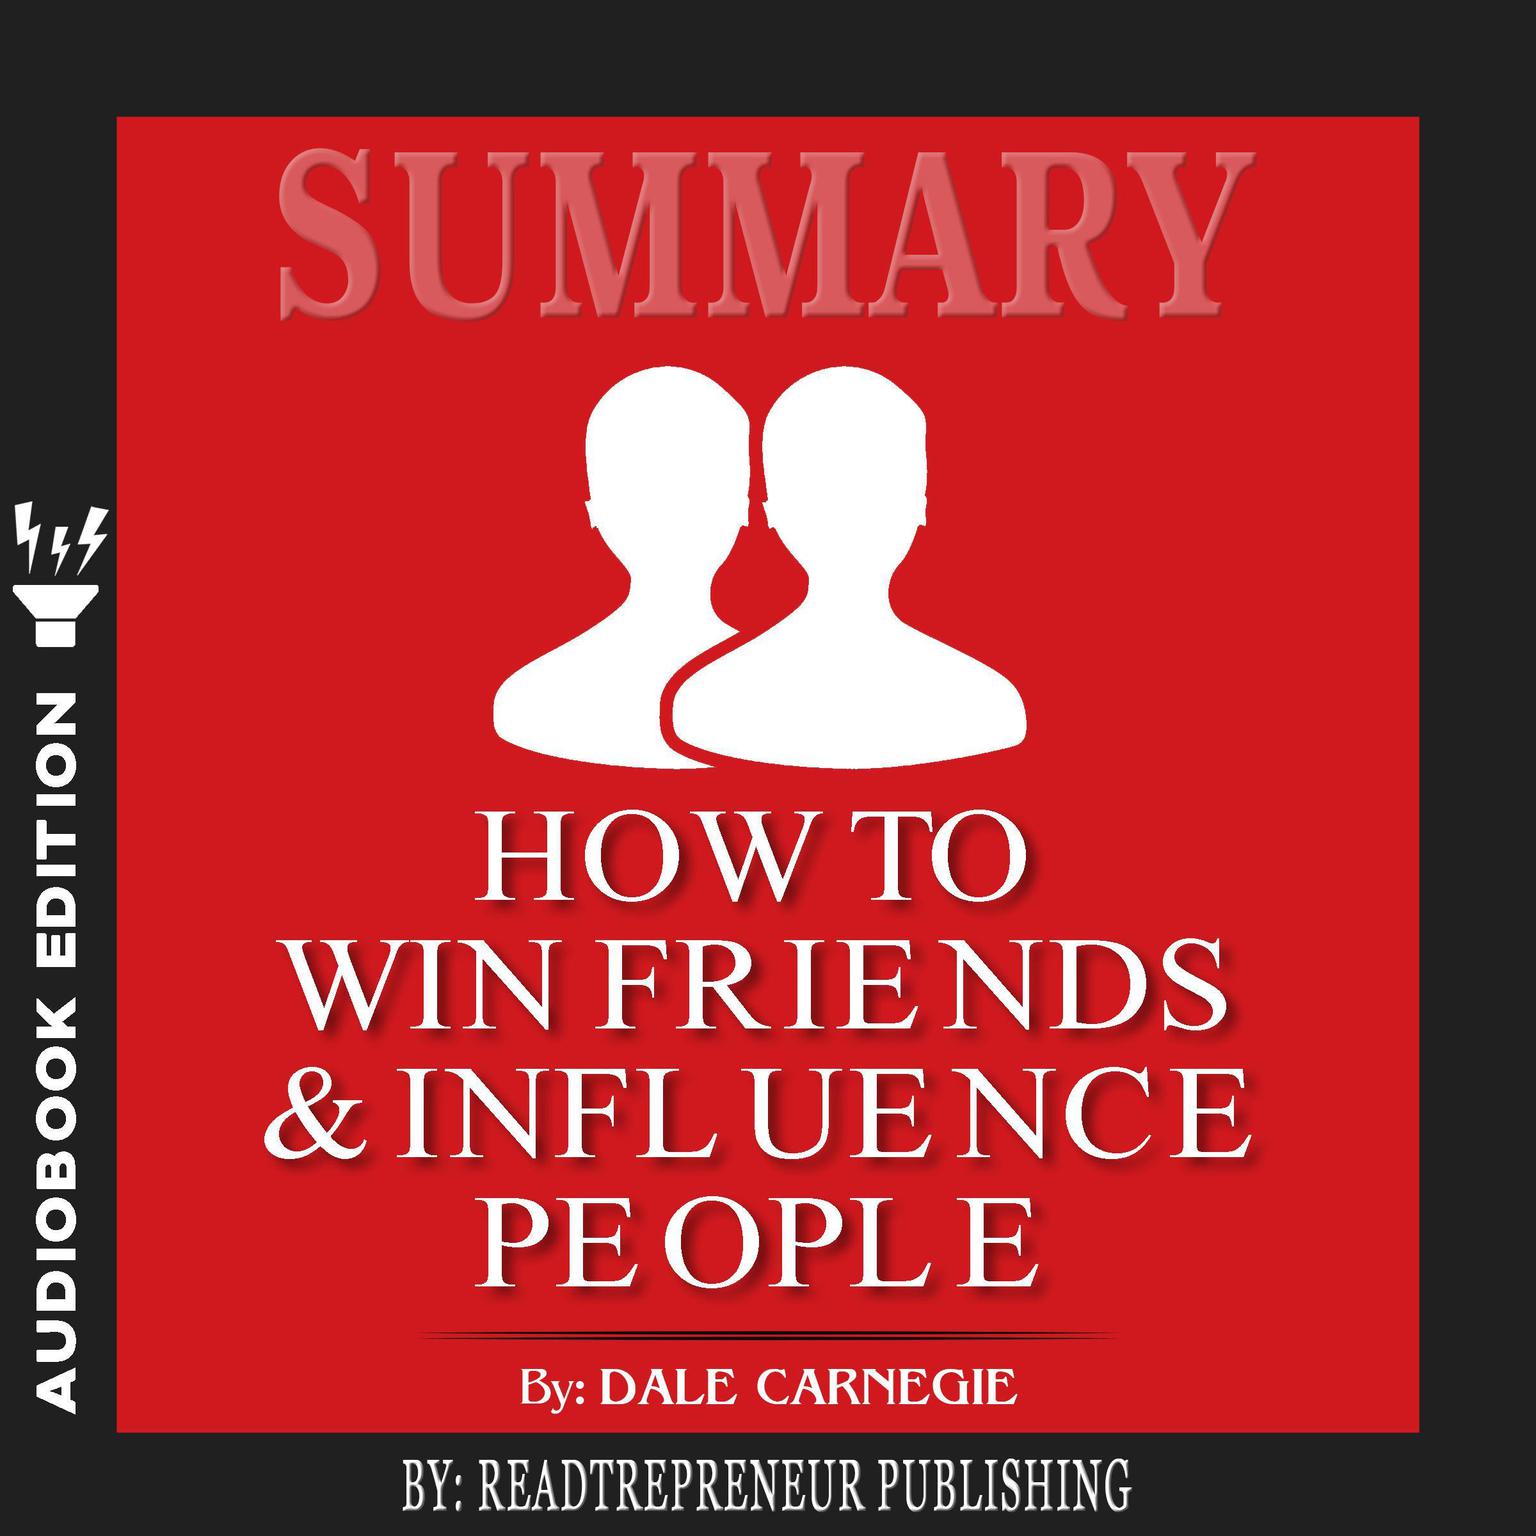 Summary of How To Win Friends and Influence People by Dale Carnegie Audiobook, by Readtrepreneur Publishing